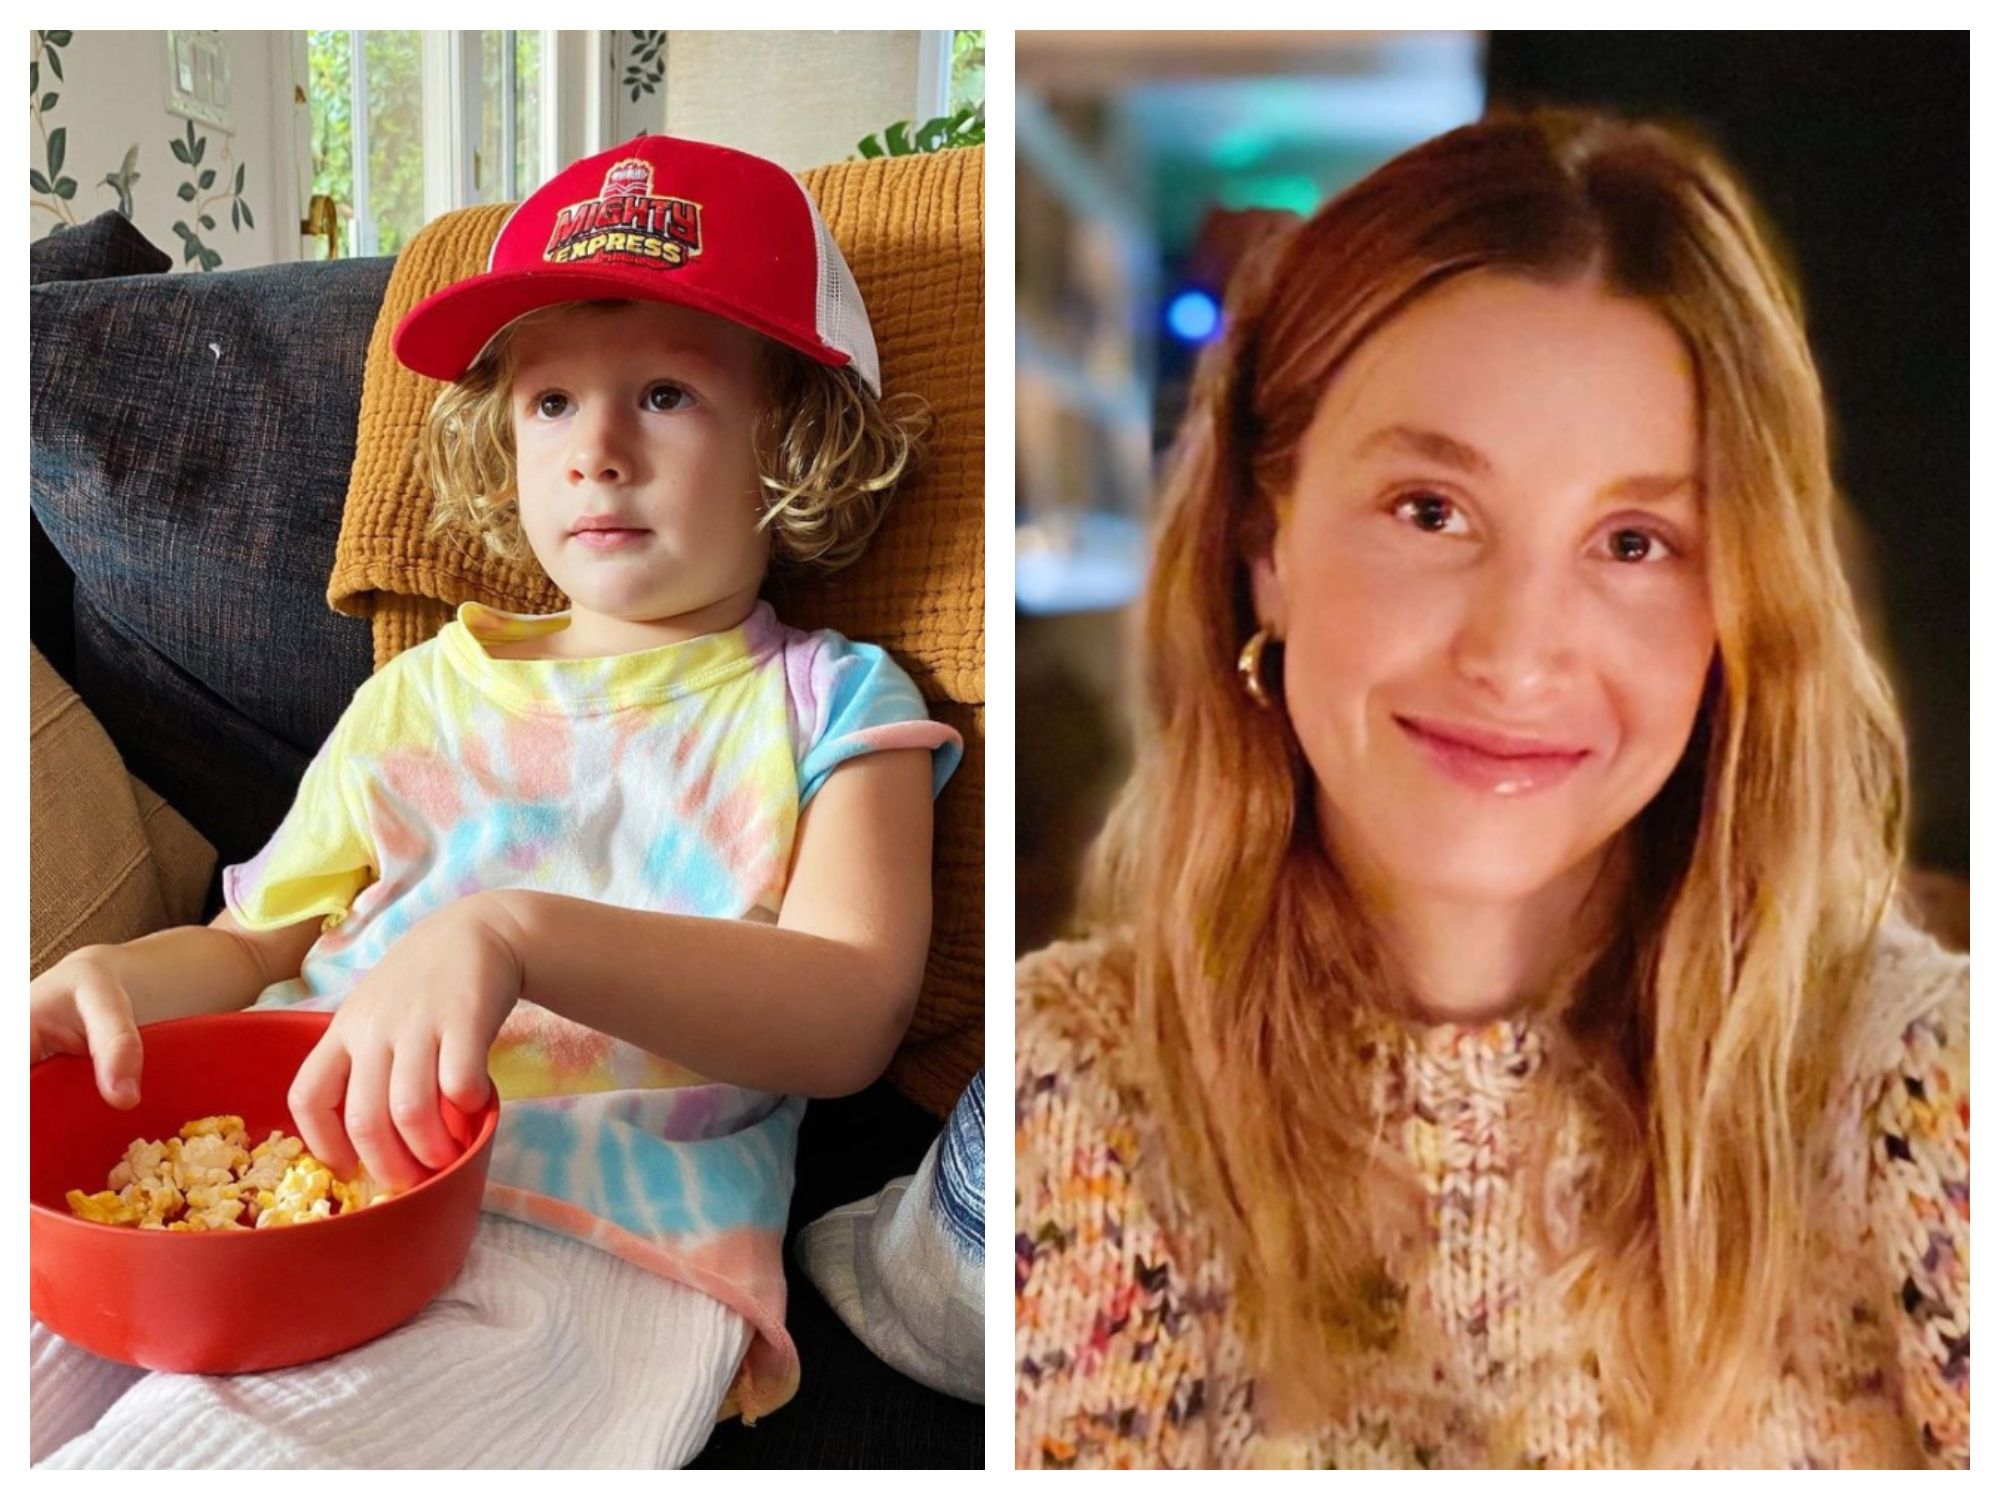 whitney port's son sonny watching tv and eating a snack and whitney port smiling